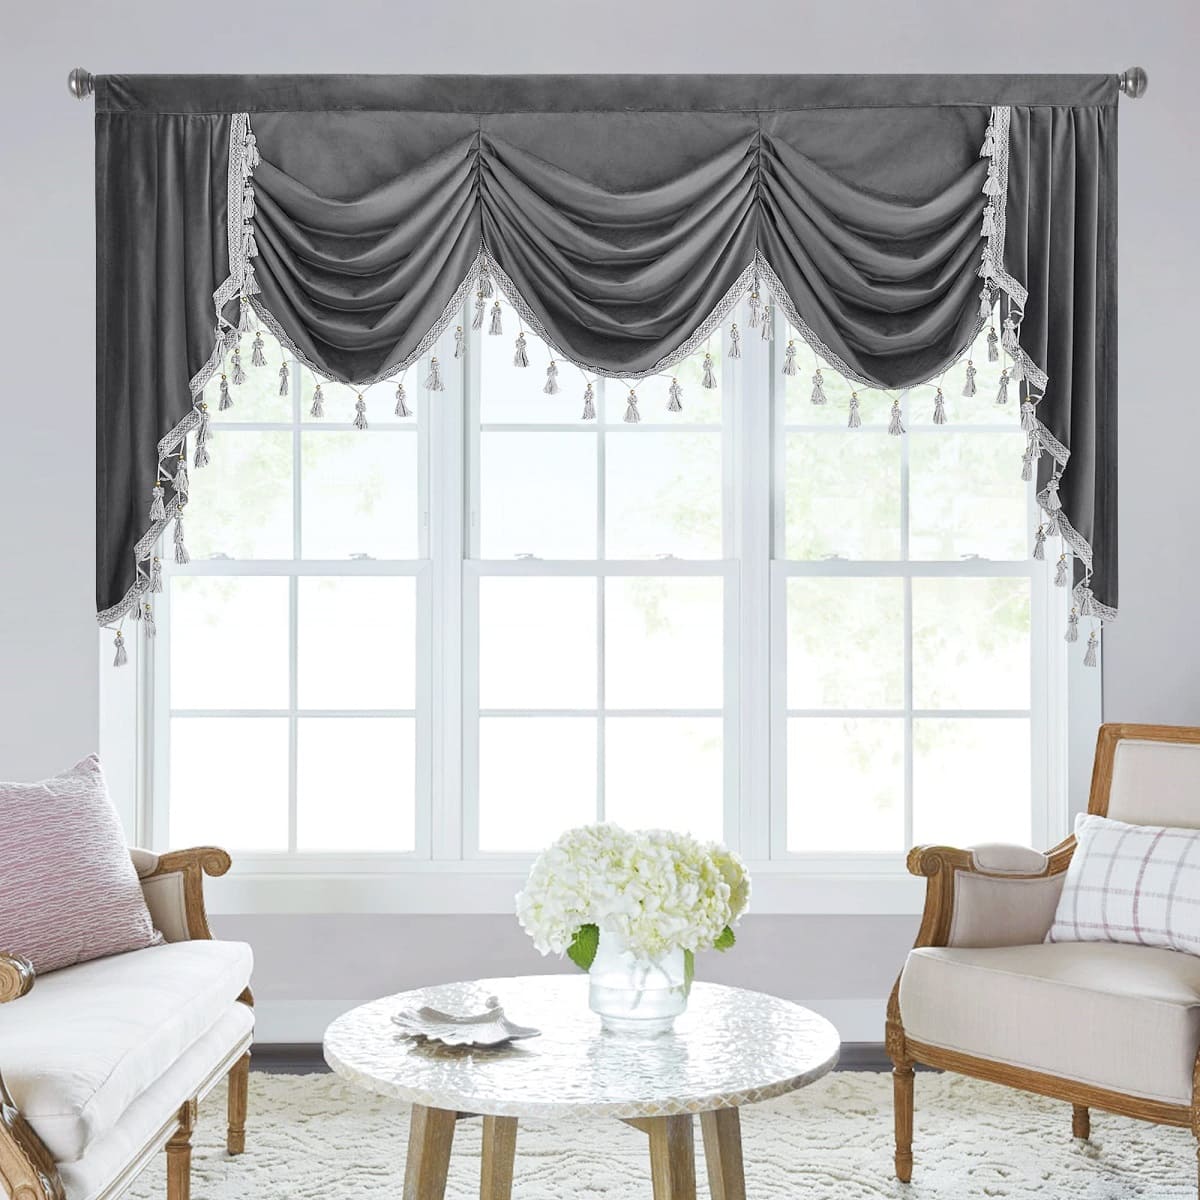 9 Amazing Curtain Valances For Windows For 2023 1697520934 